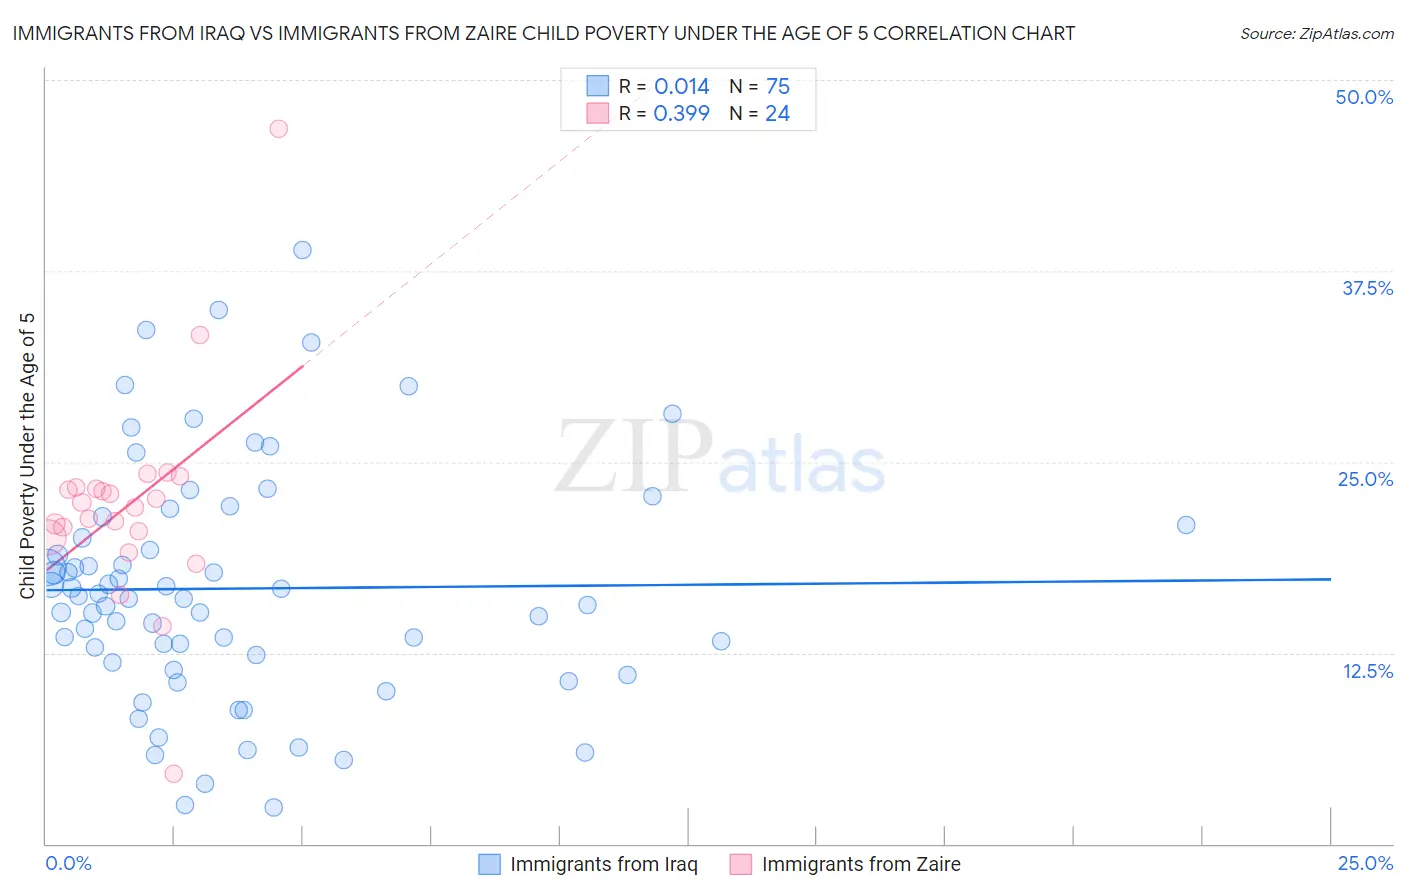 Immigrants from Iraq vs Immigrants from Zaire Child Poverty Under the Age of 5